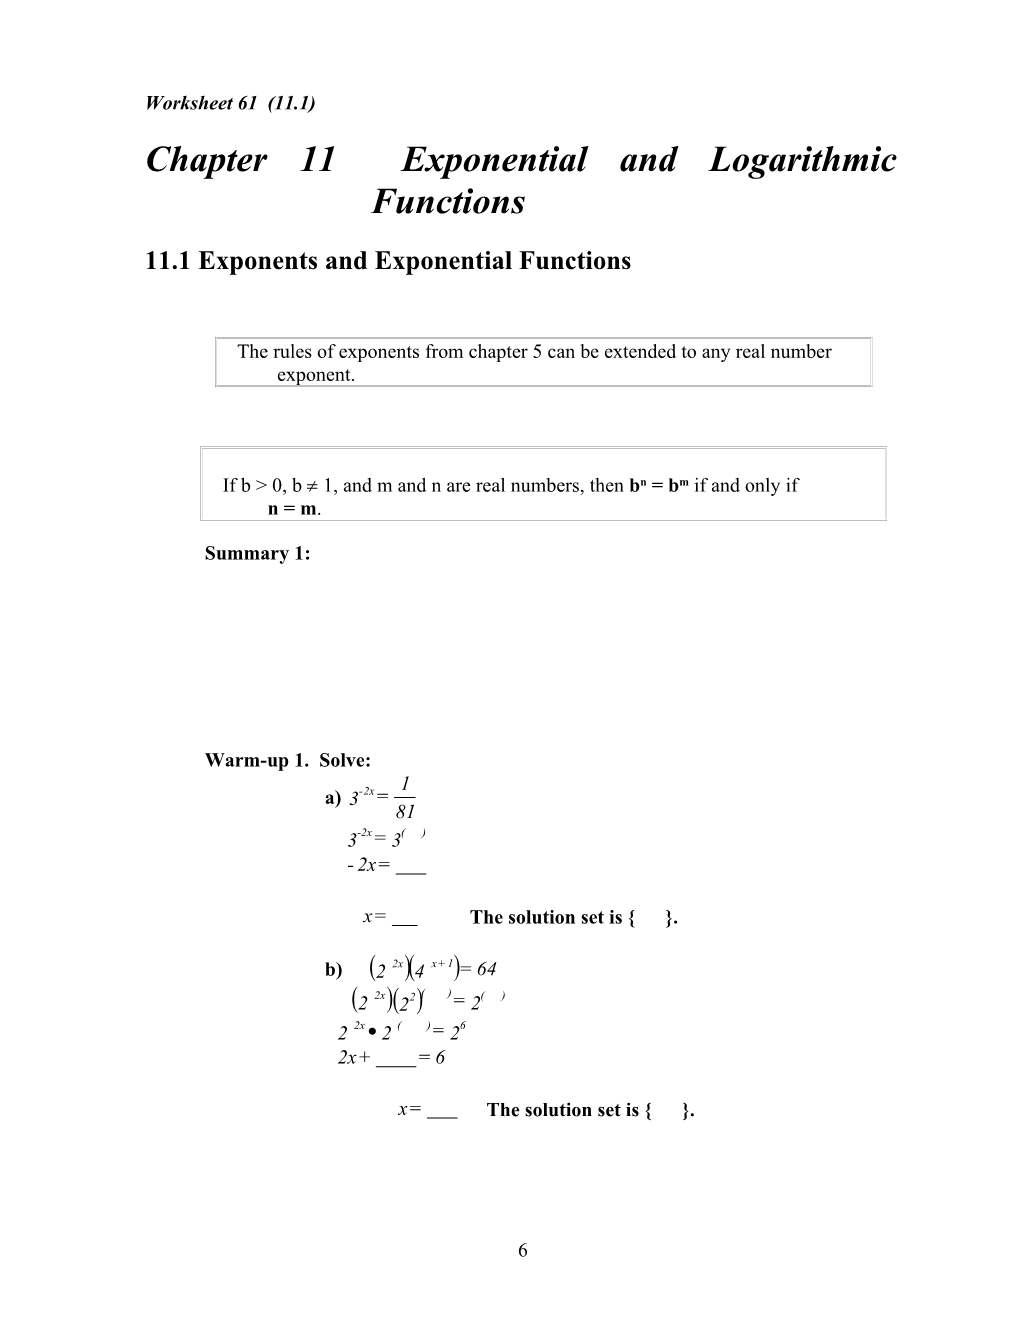 Chapter 11 Exponential and Logarithmic Functions